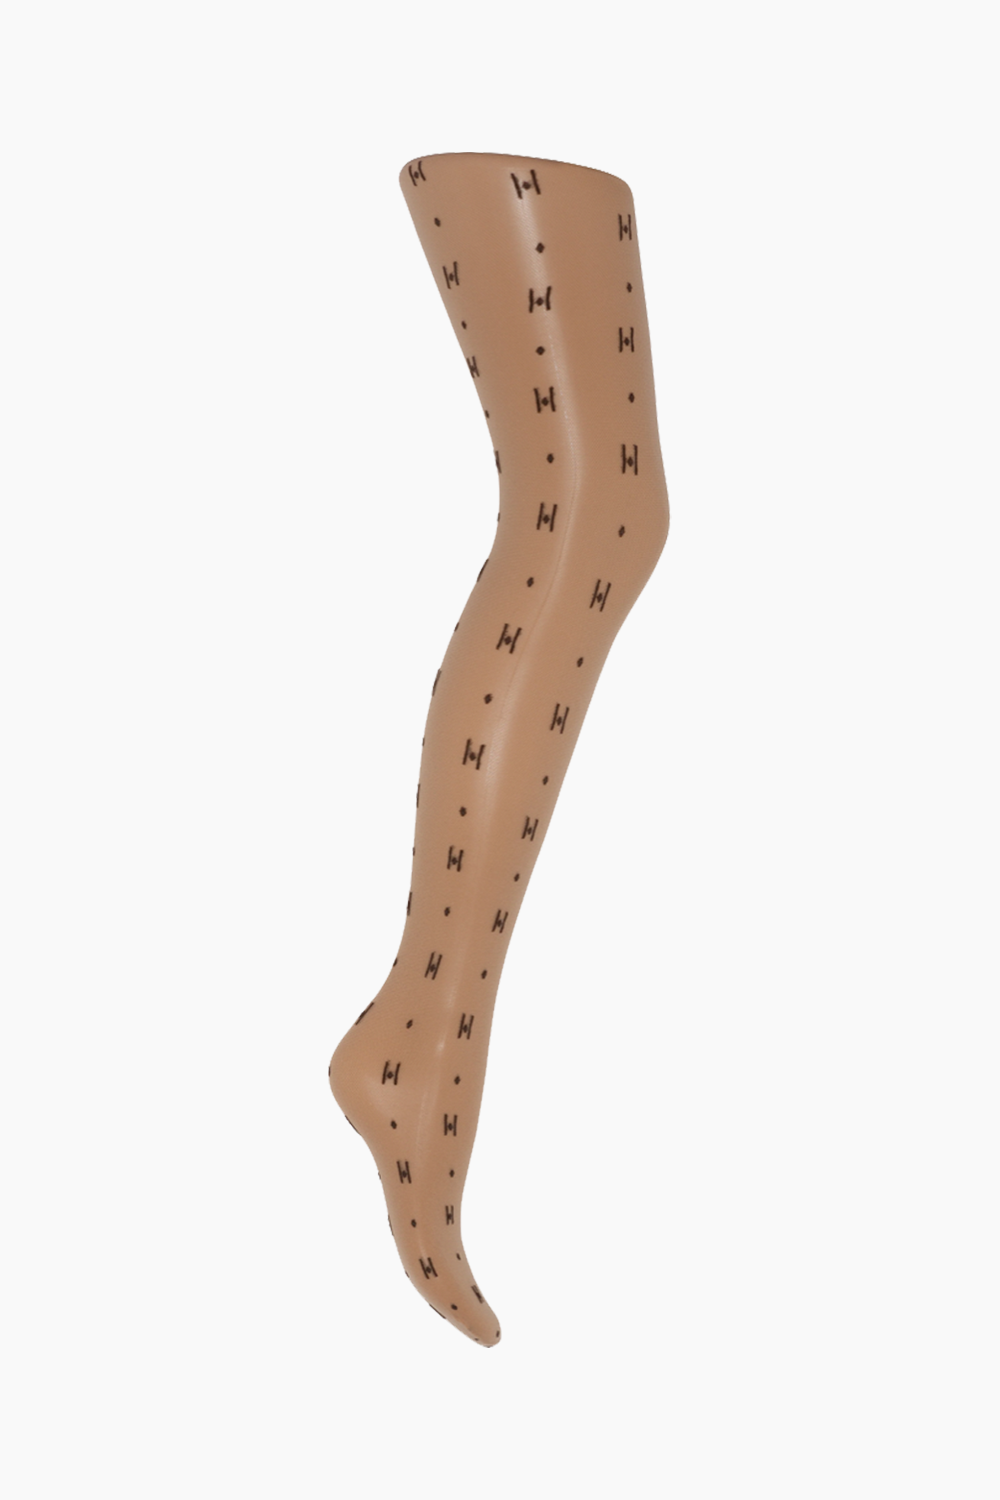 HTD Logo tights - Brown - Hype the Detail - Brun L/XL